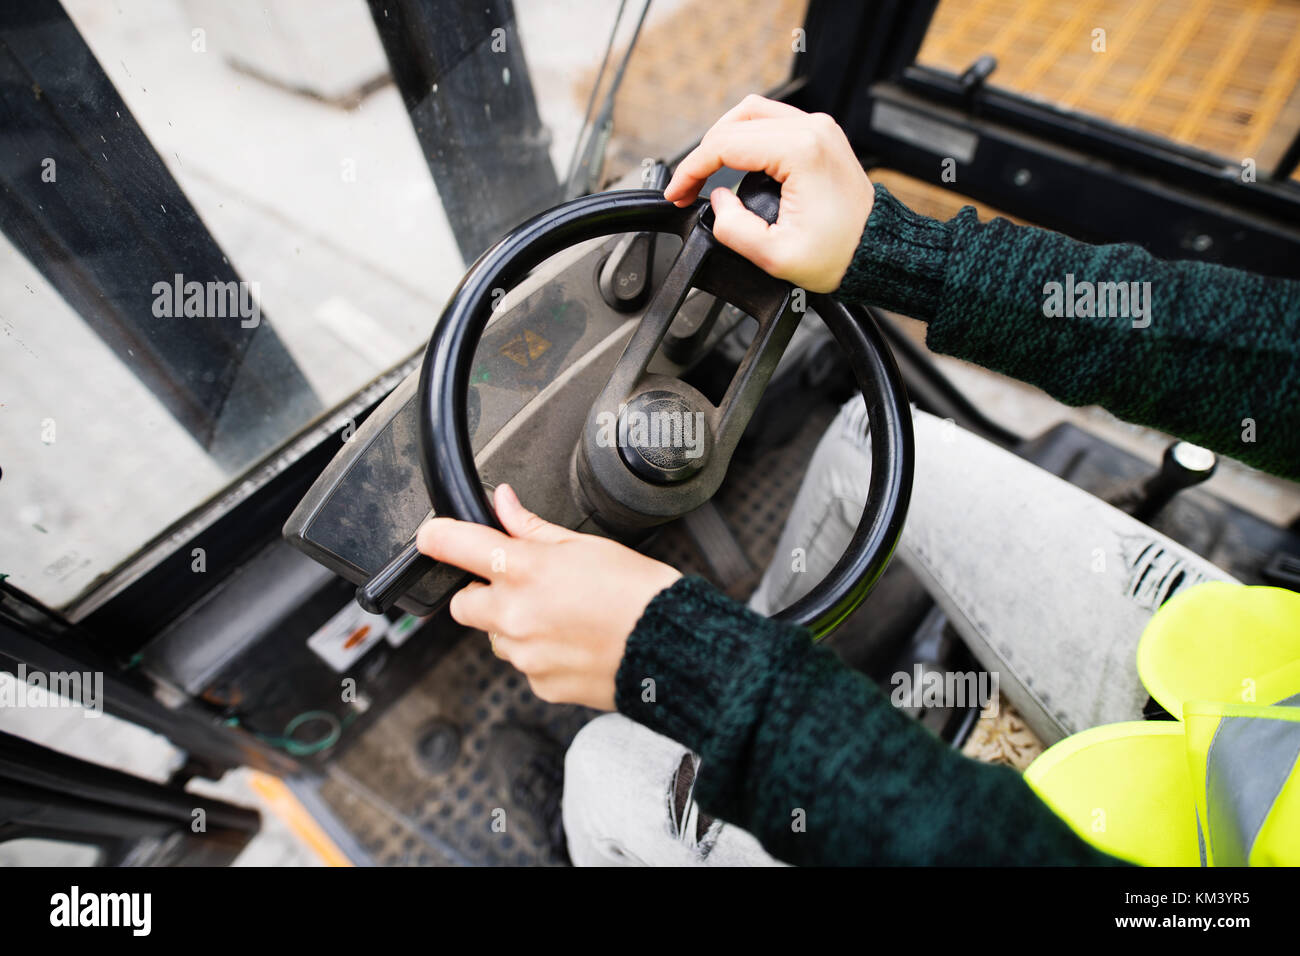 Woman forklift truck driver in an industrial area. Stock Photo